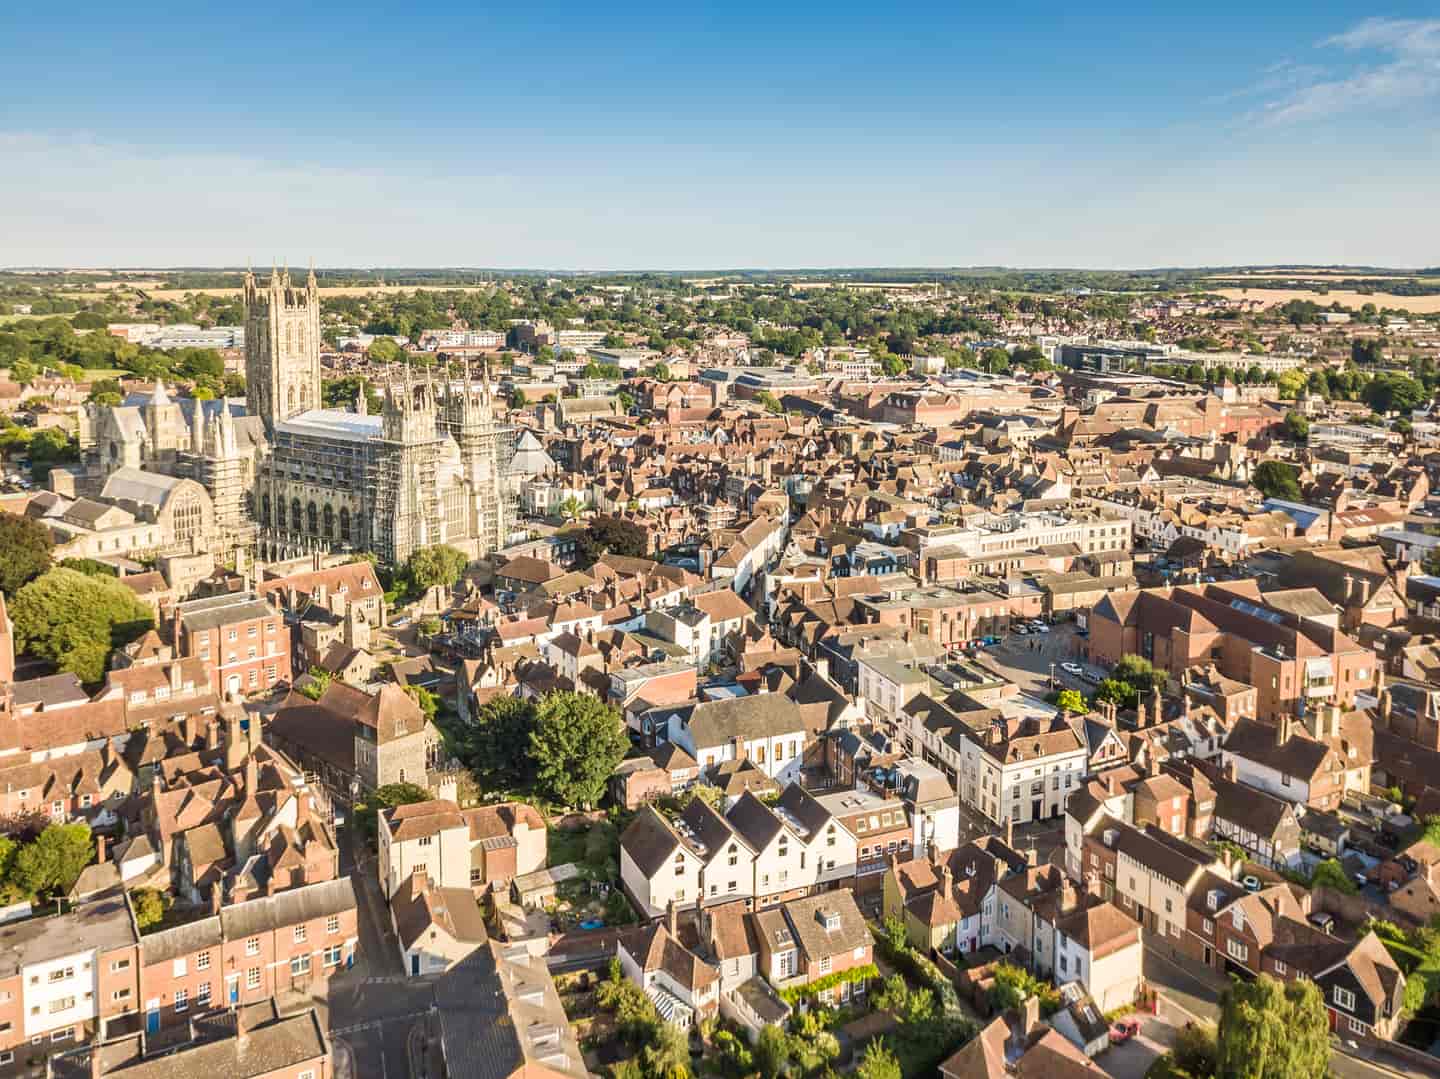 Student Accommodation in Canterbury - Canterbury Cathedral and skyline